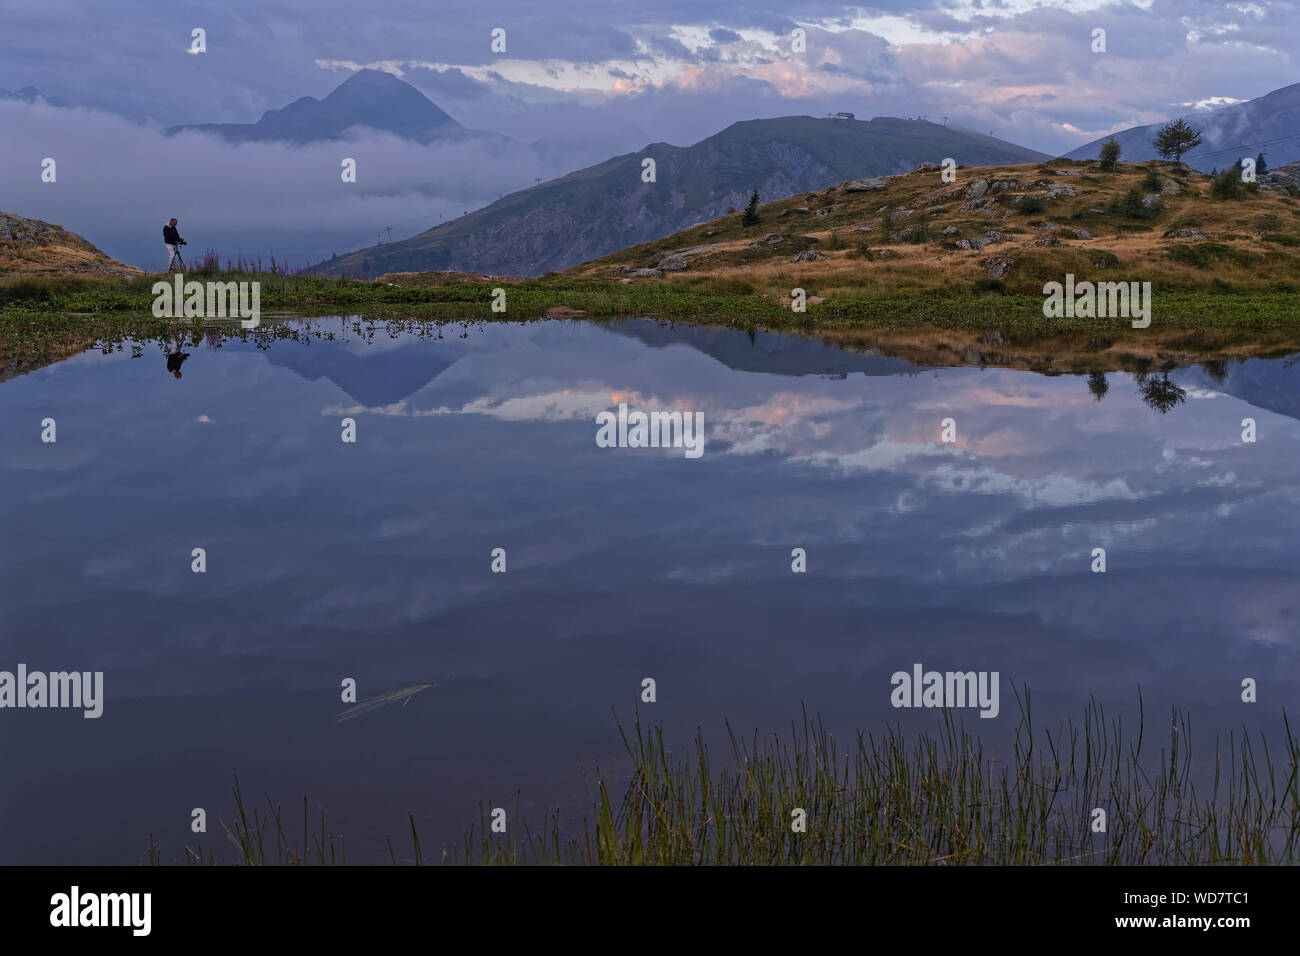 SAINT-SORLIN, FRANCE, August 10, 2019 : Photographer shoots a landscape of a mountain lake in the first light of dawn. Stock Photo